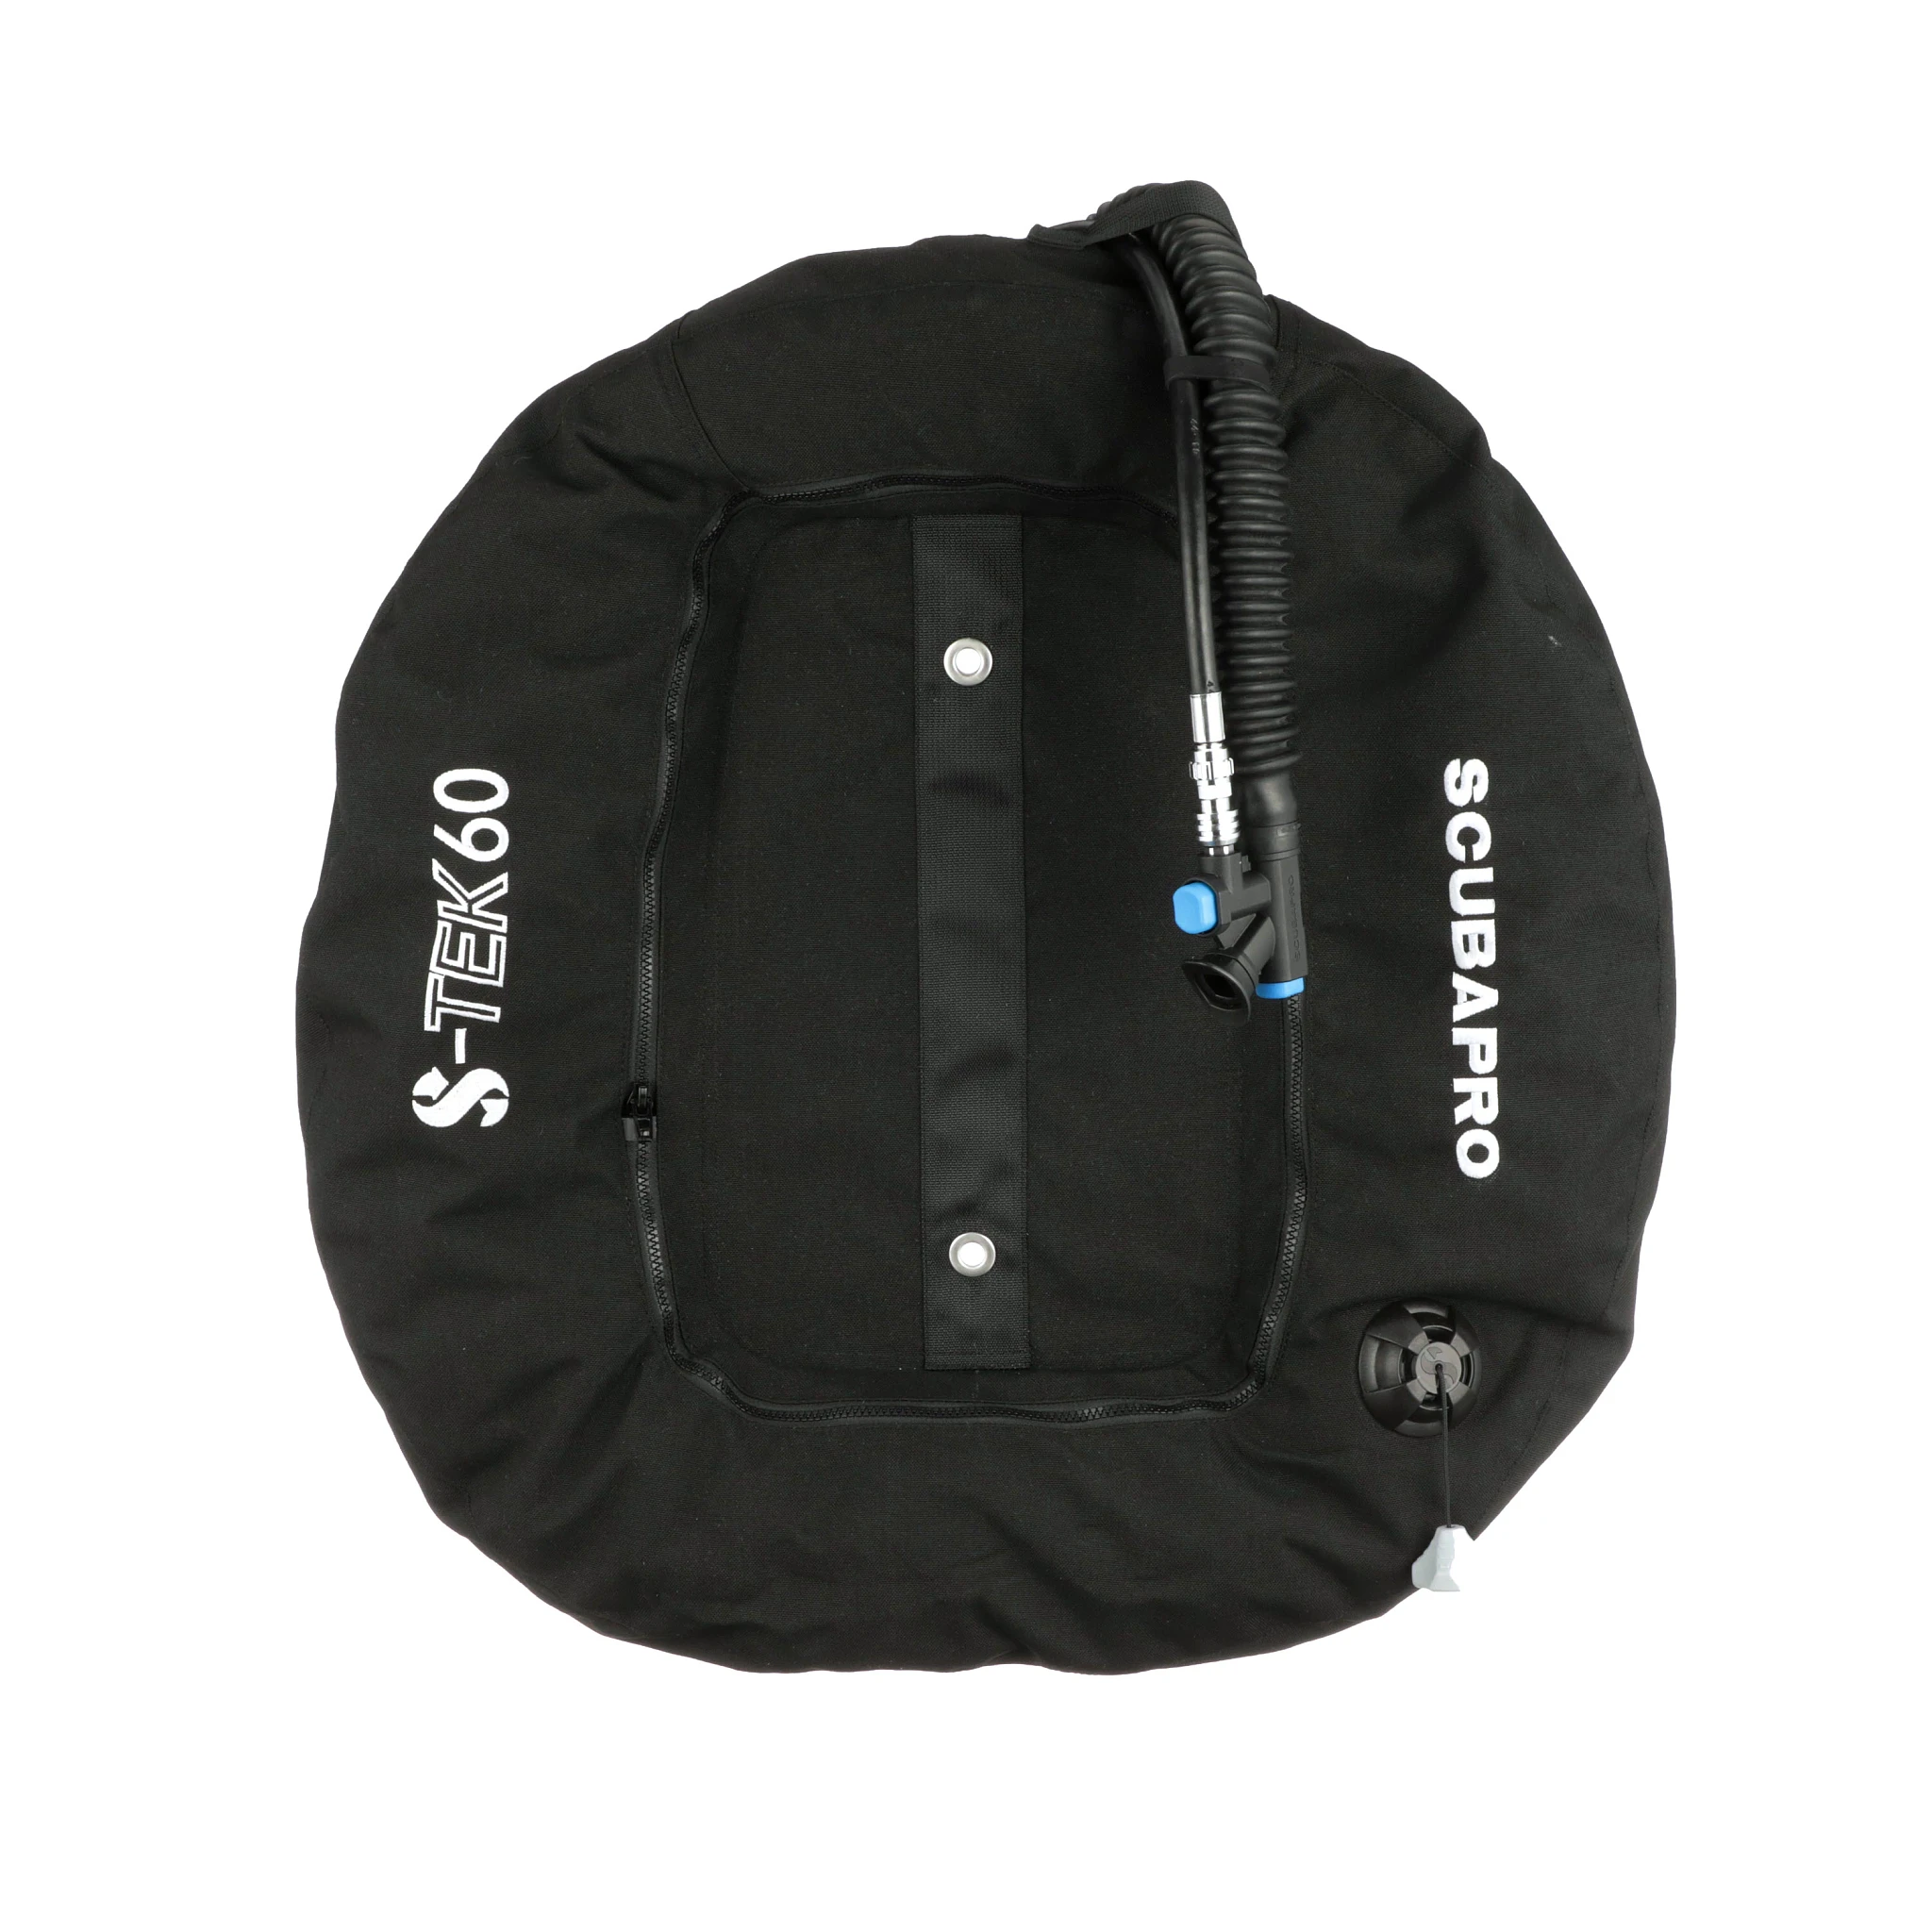 S-Tek Pure Harness with Back Plate - SCUBAPRO